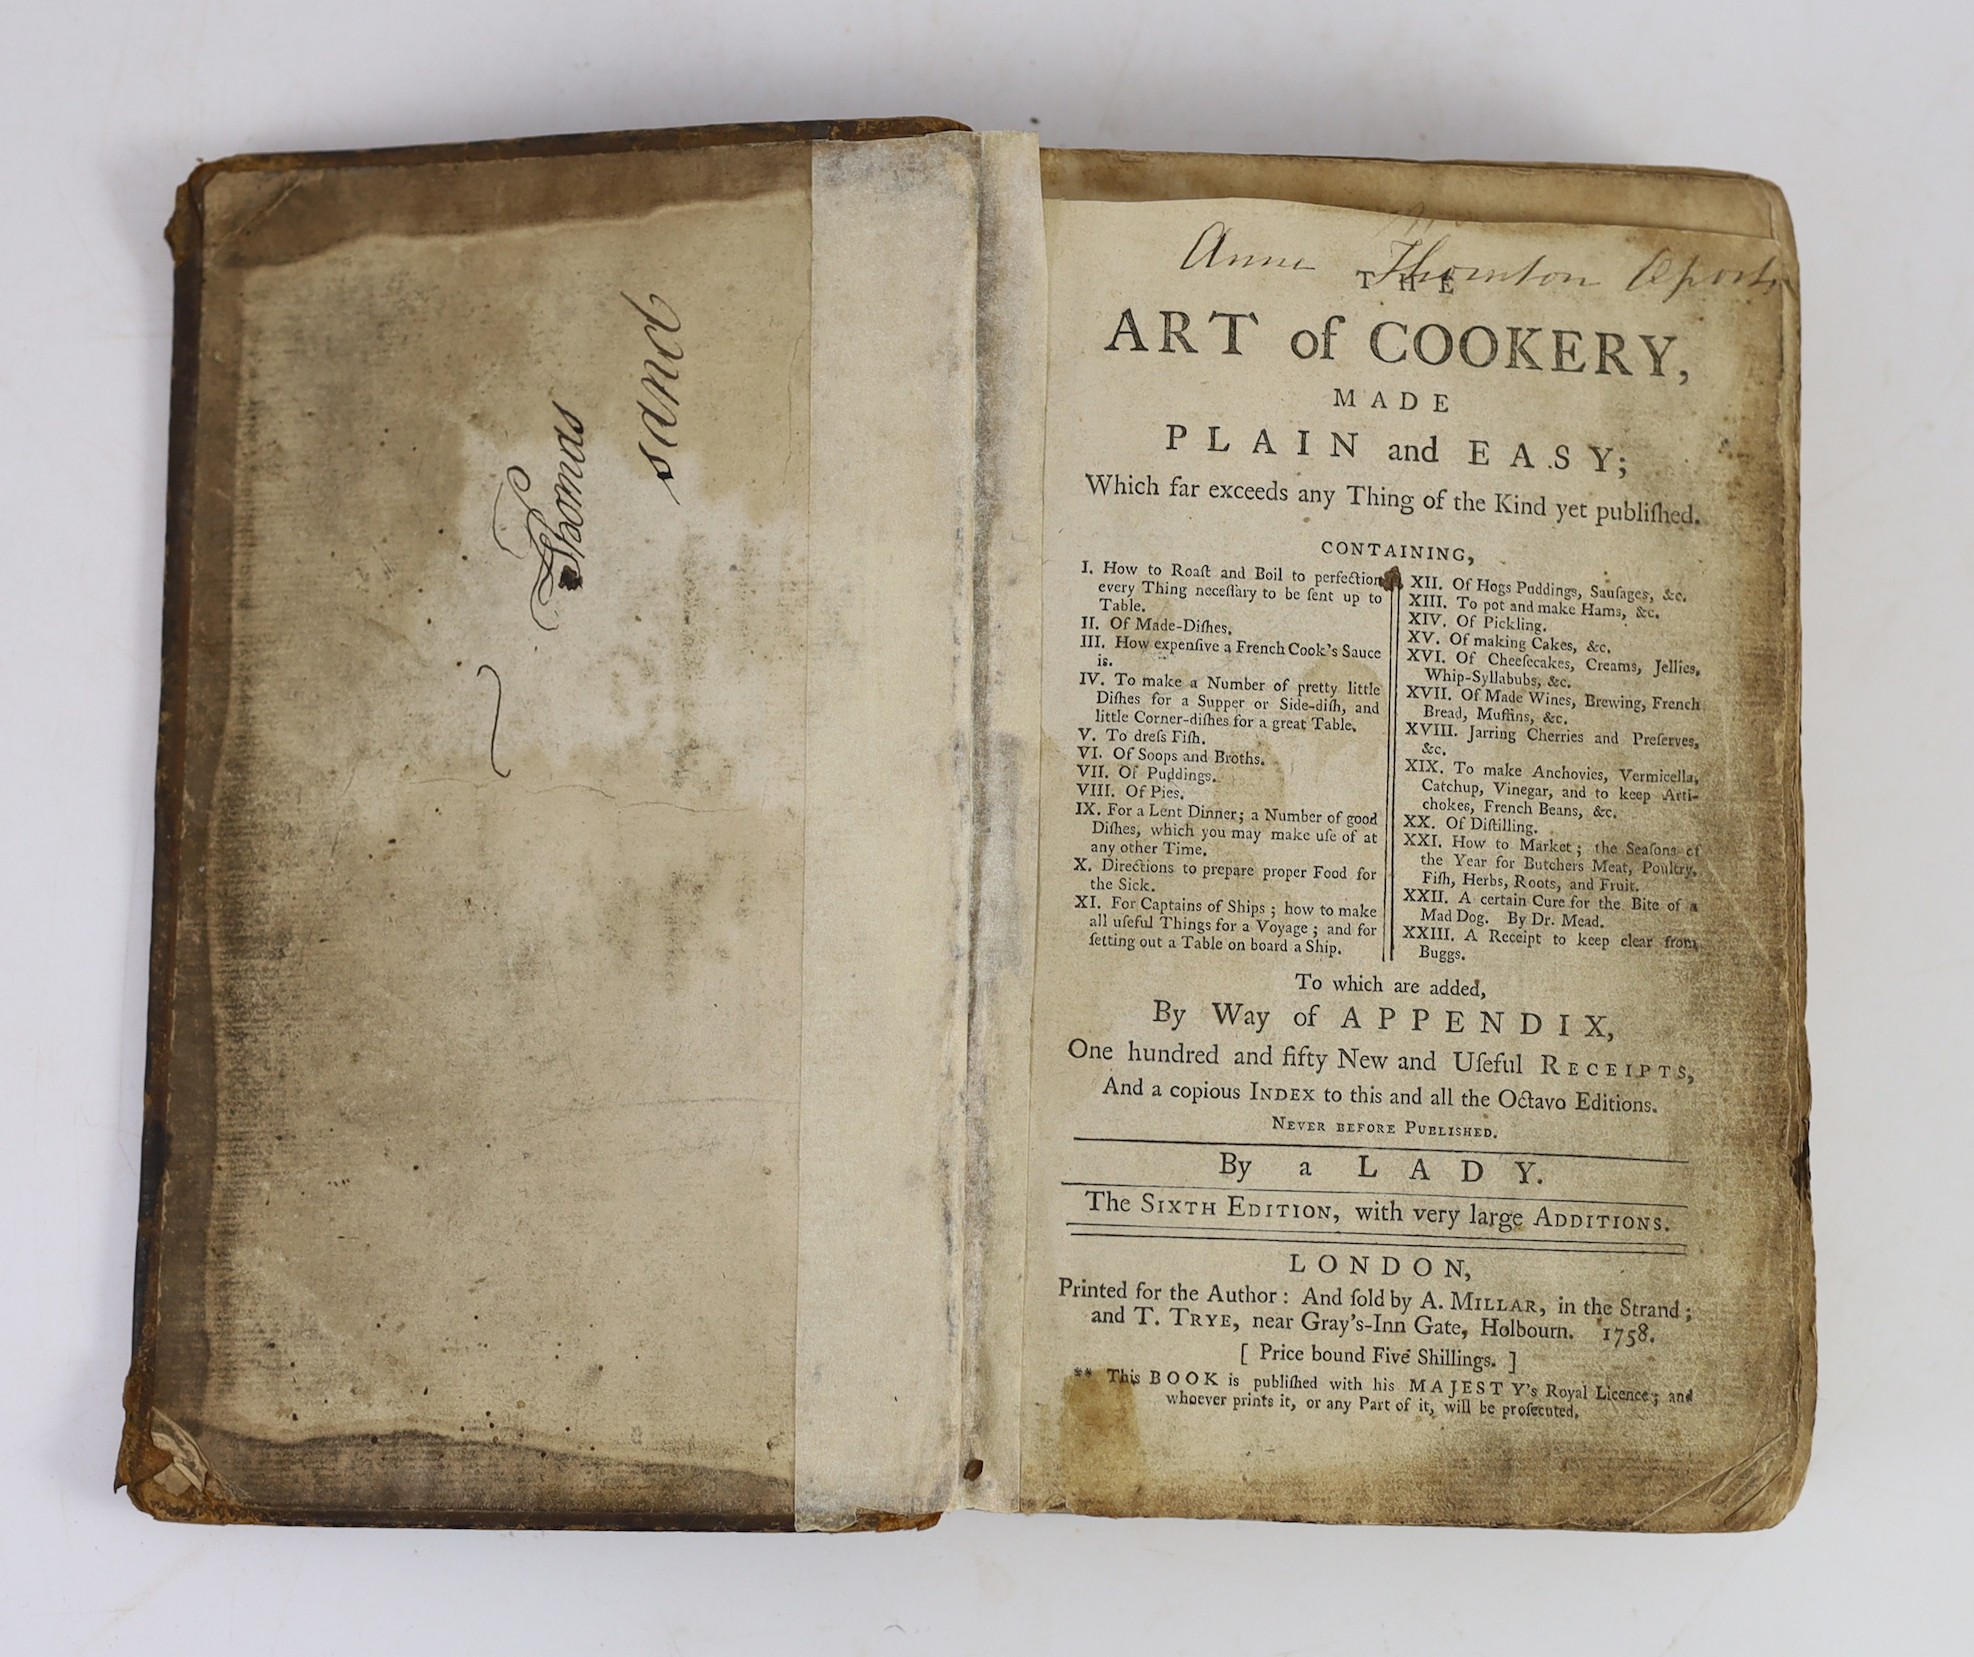 Glasse, Hannah - The Art of Cookery , Made Plain and Easy, 6th edition, 8vo, original calf, London, 1758